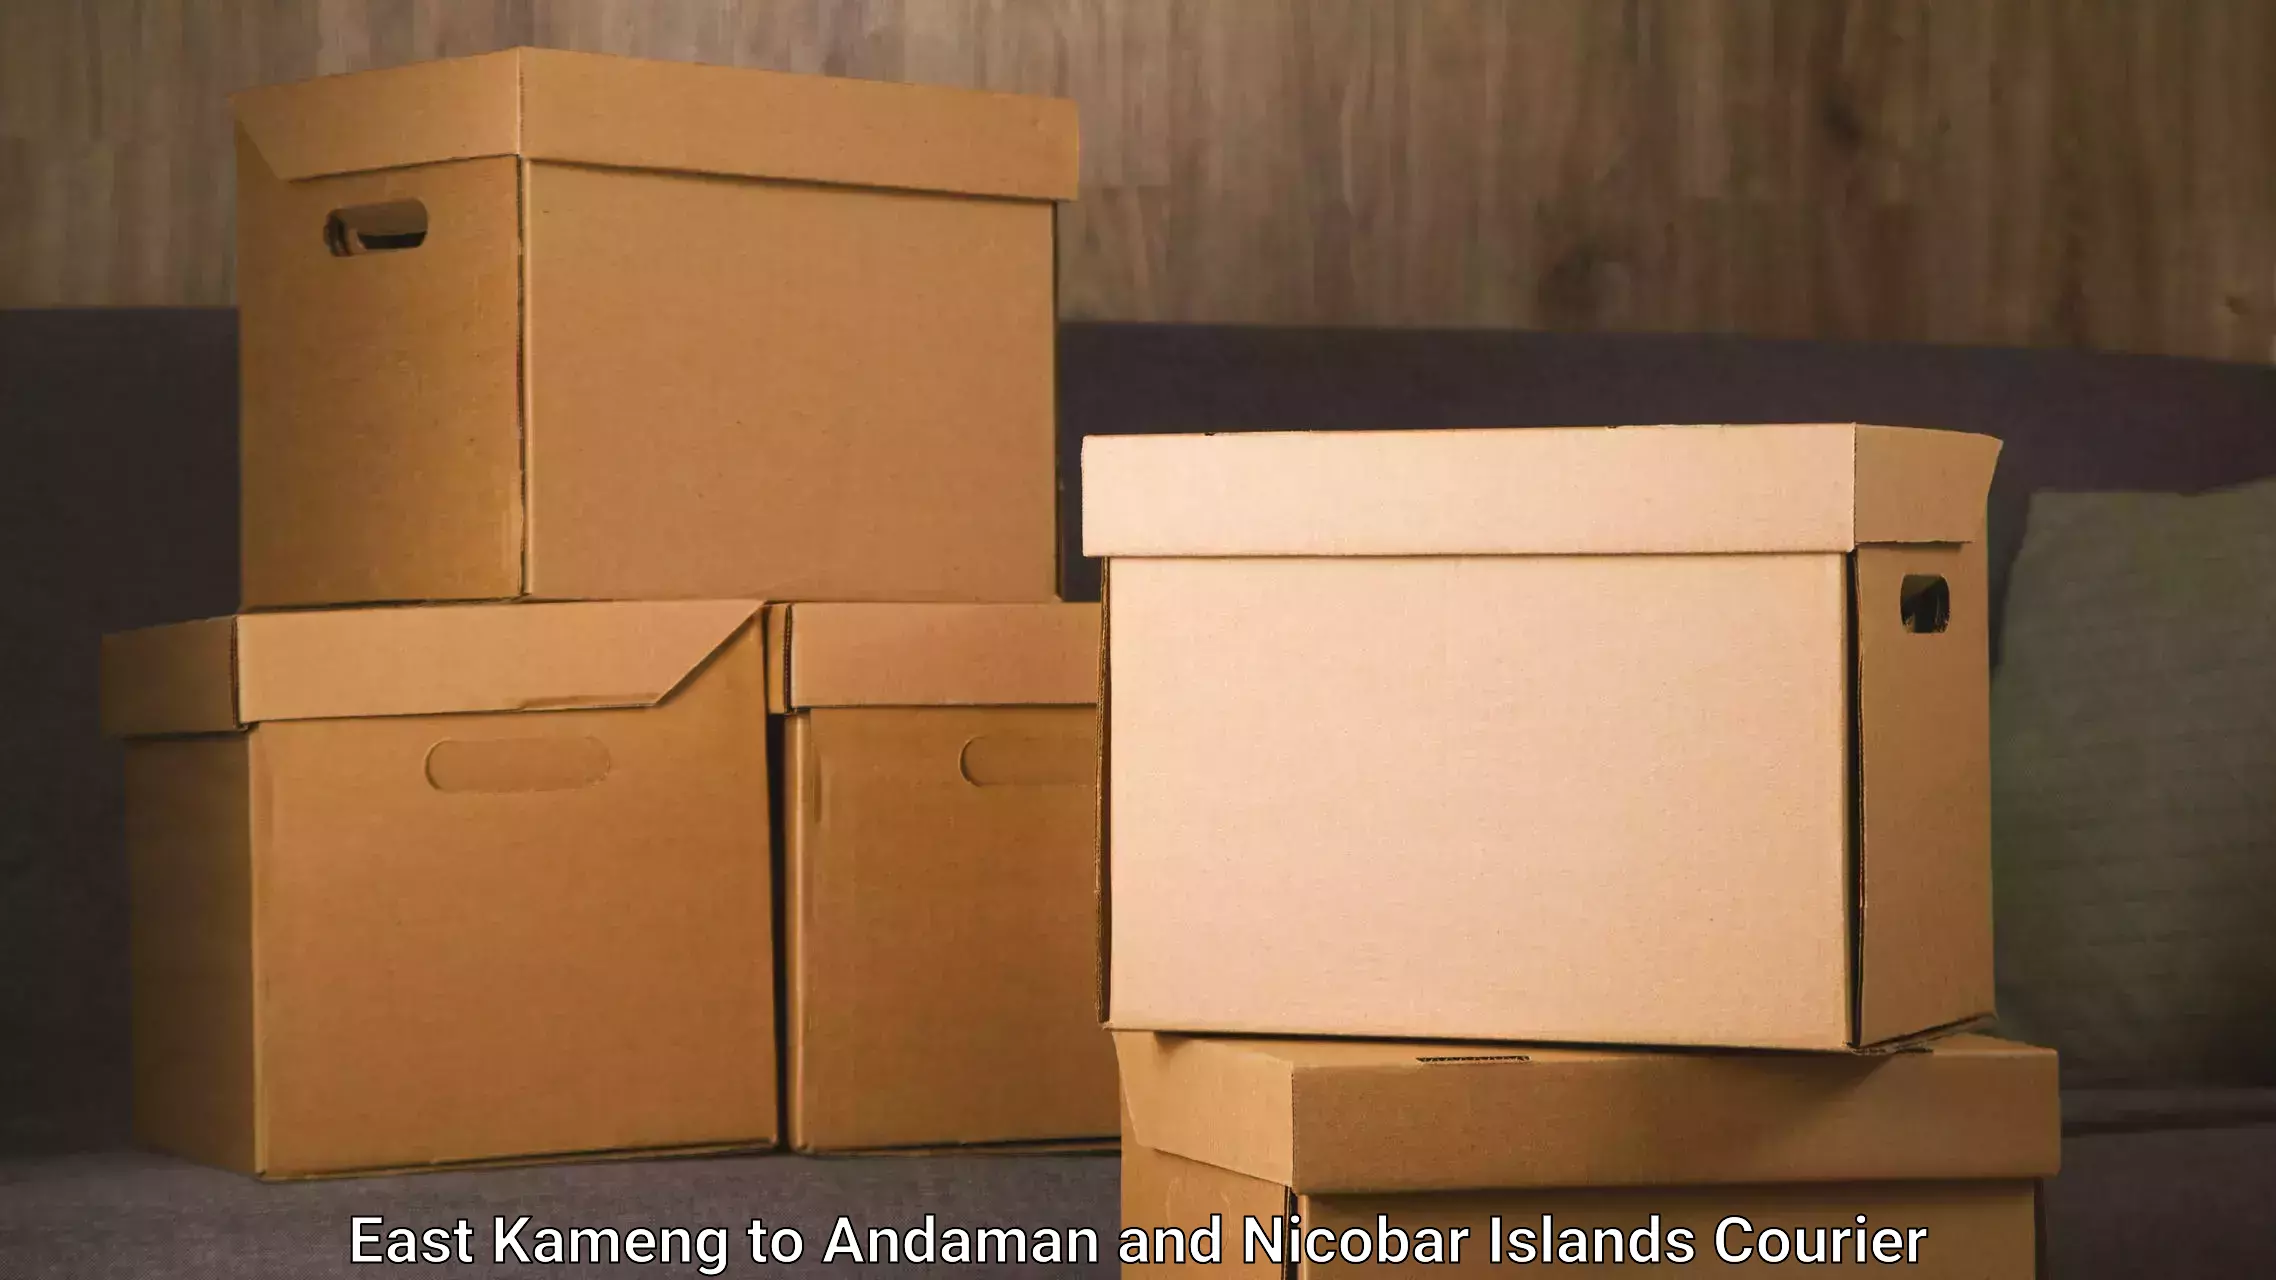 Express delivery network East Kameng to South Andaman